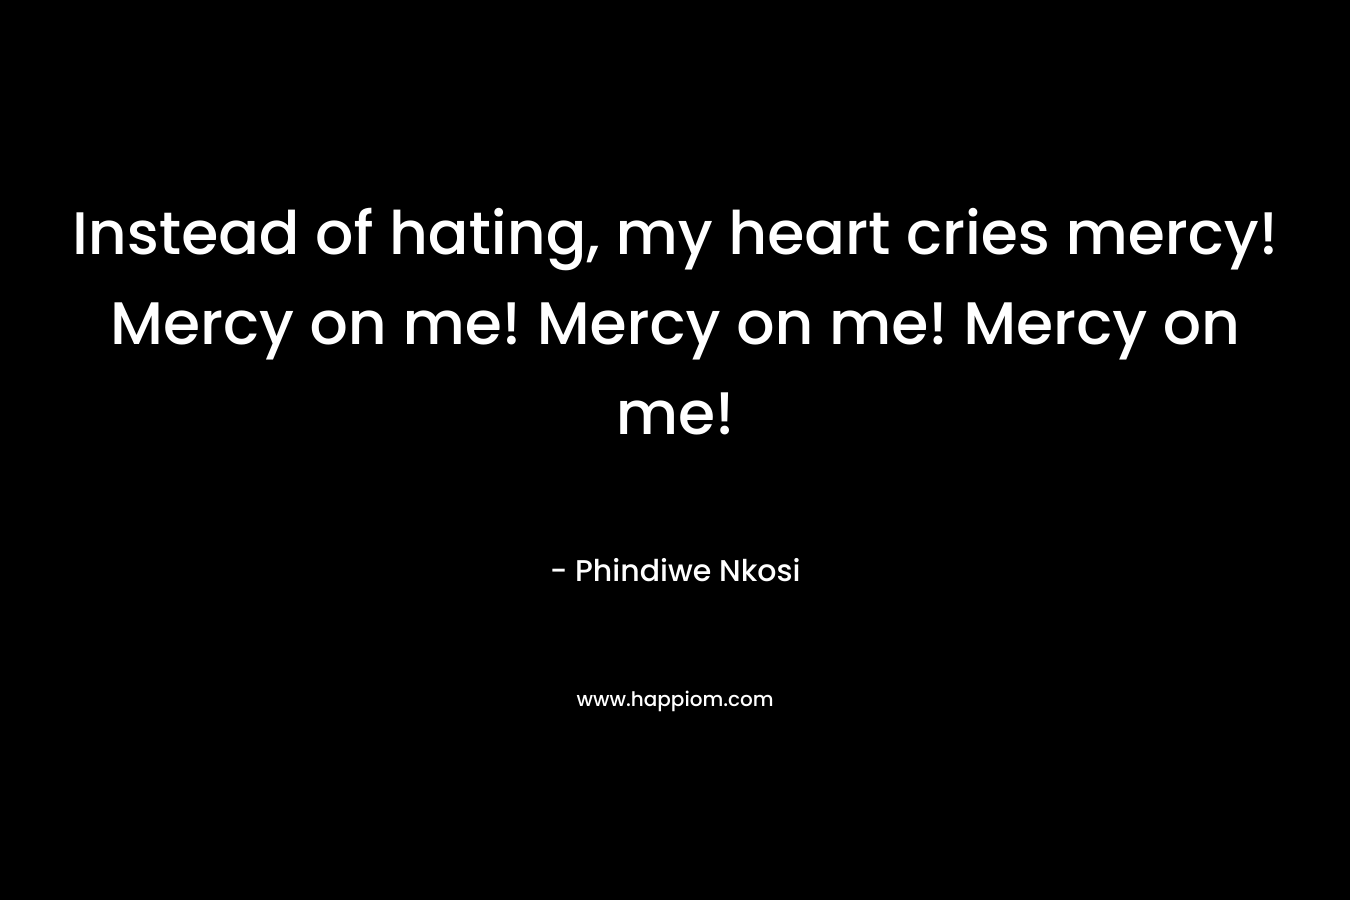 Instead of hating, my heart cries mercy! Mercy on me! Mercy on me! Mercy on me! – Phindiwe Nkosi